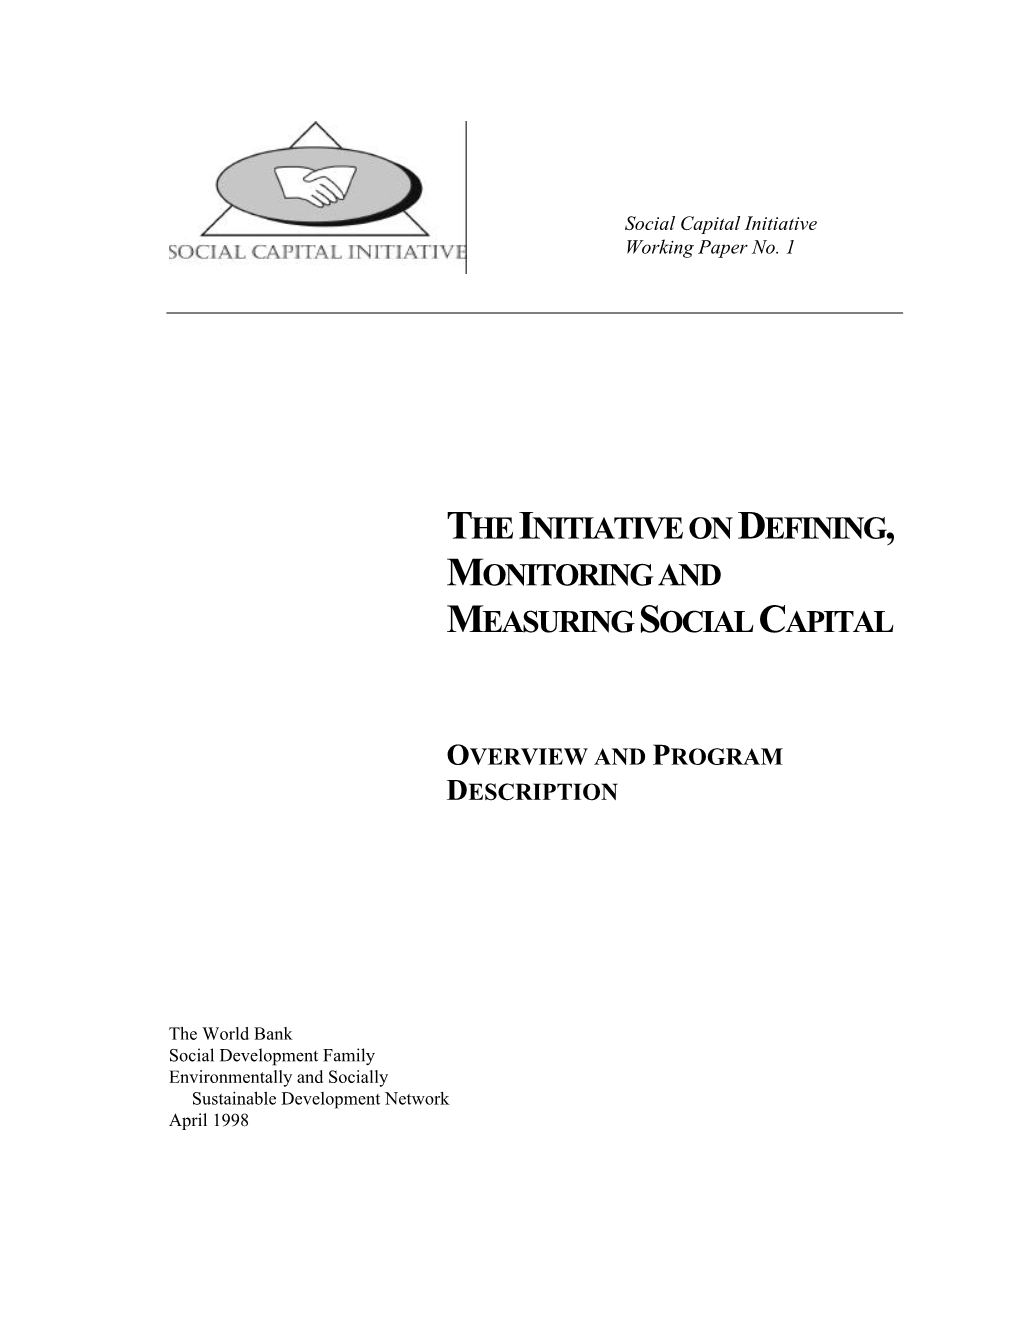 The Initiative on Defining, Monitoring and Measuring Social Capital